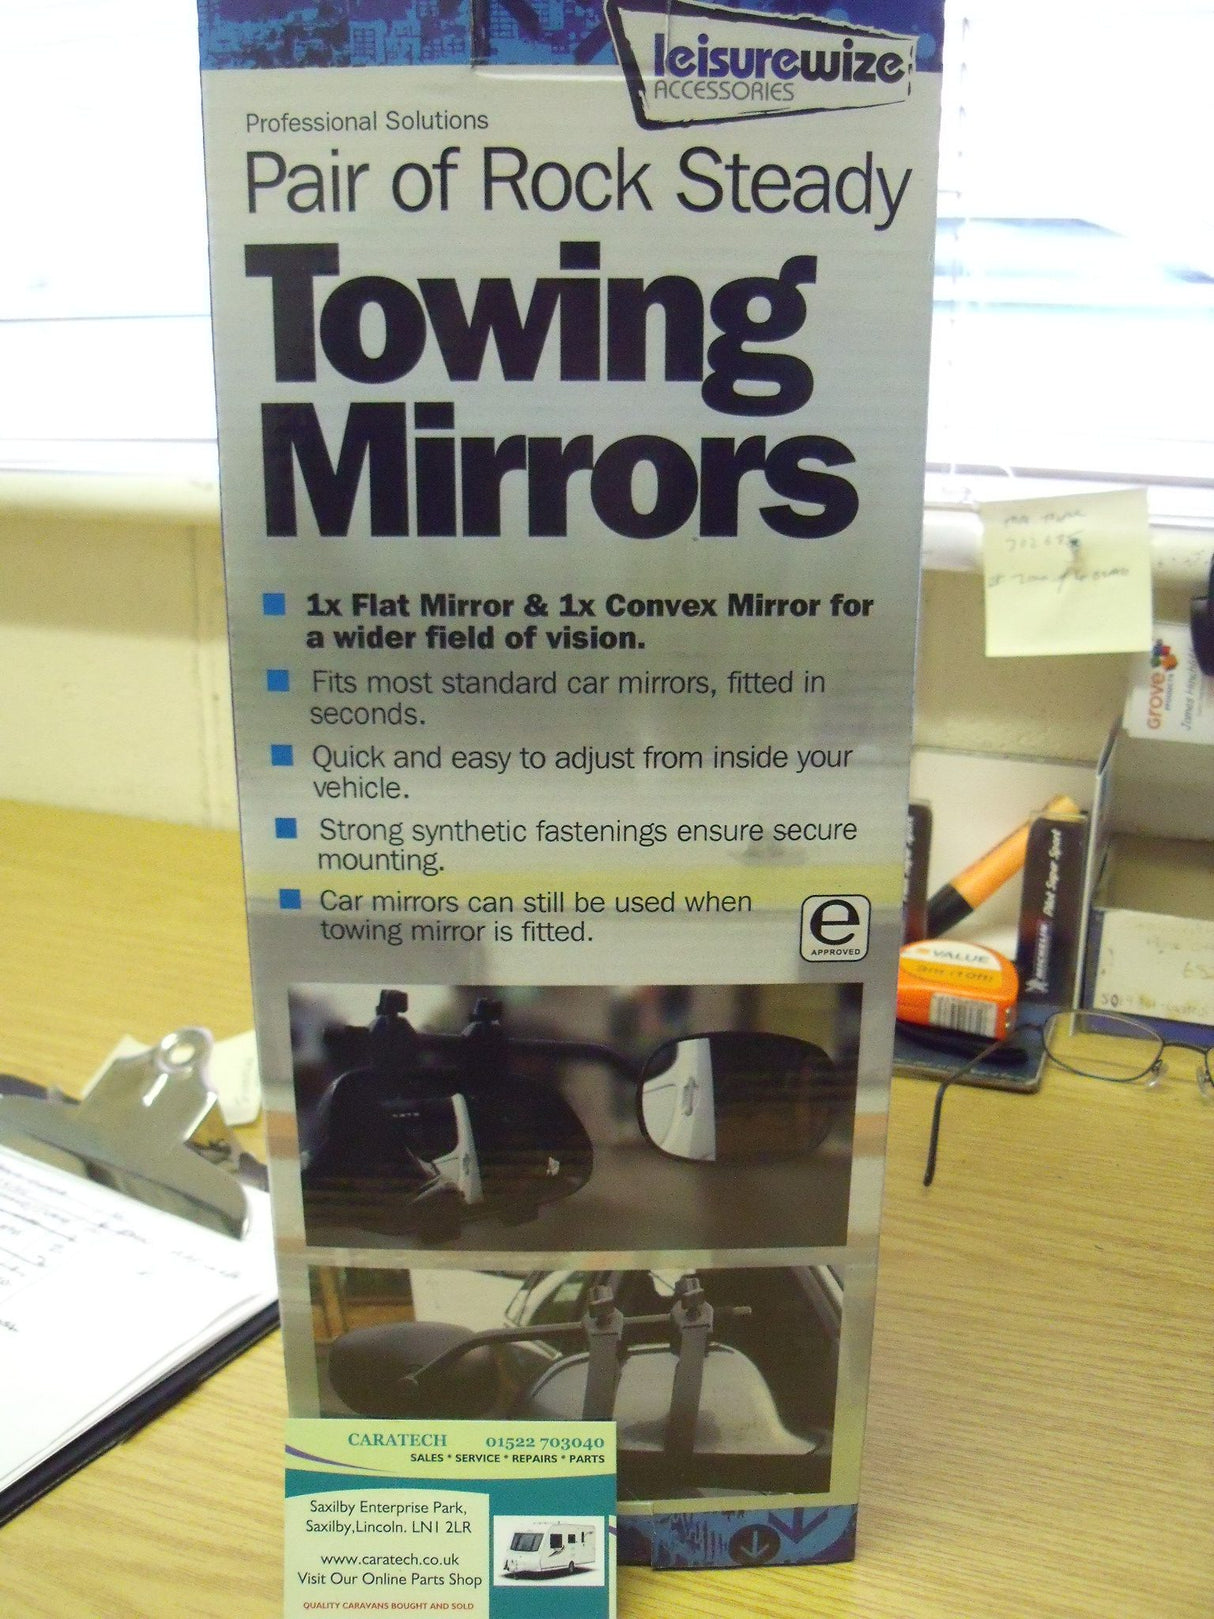 Pair of Rock Steady Towing Mirrors - LWACC34 - Caratech Caravan Parts